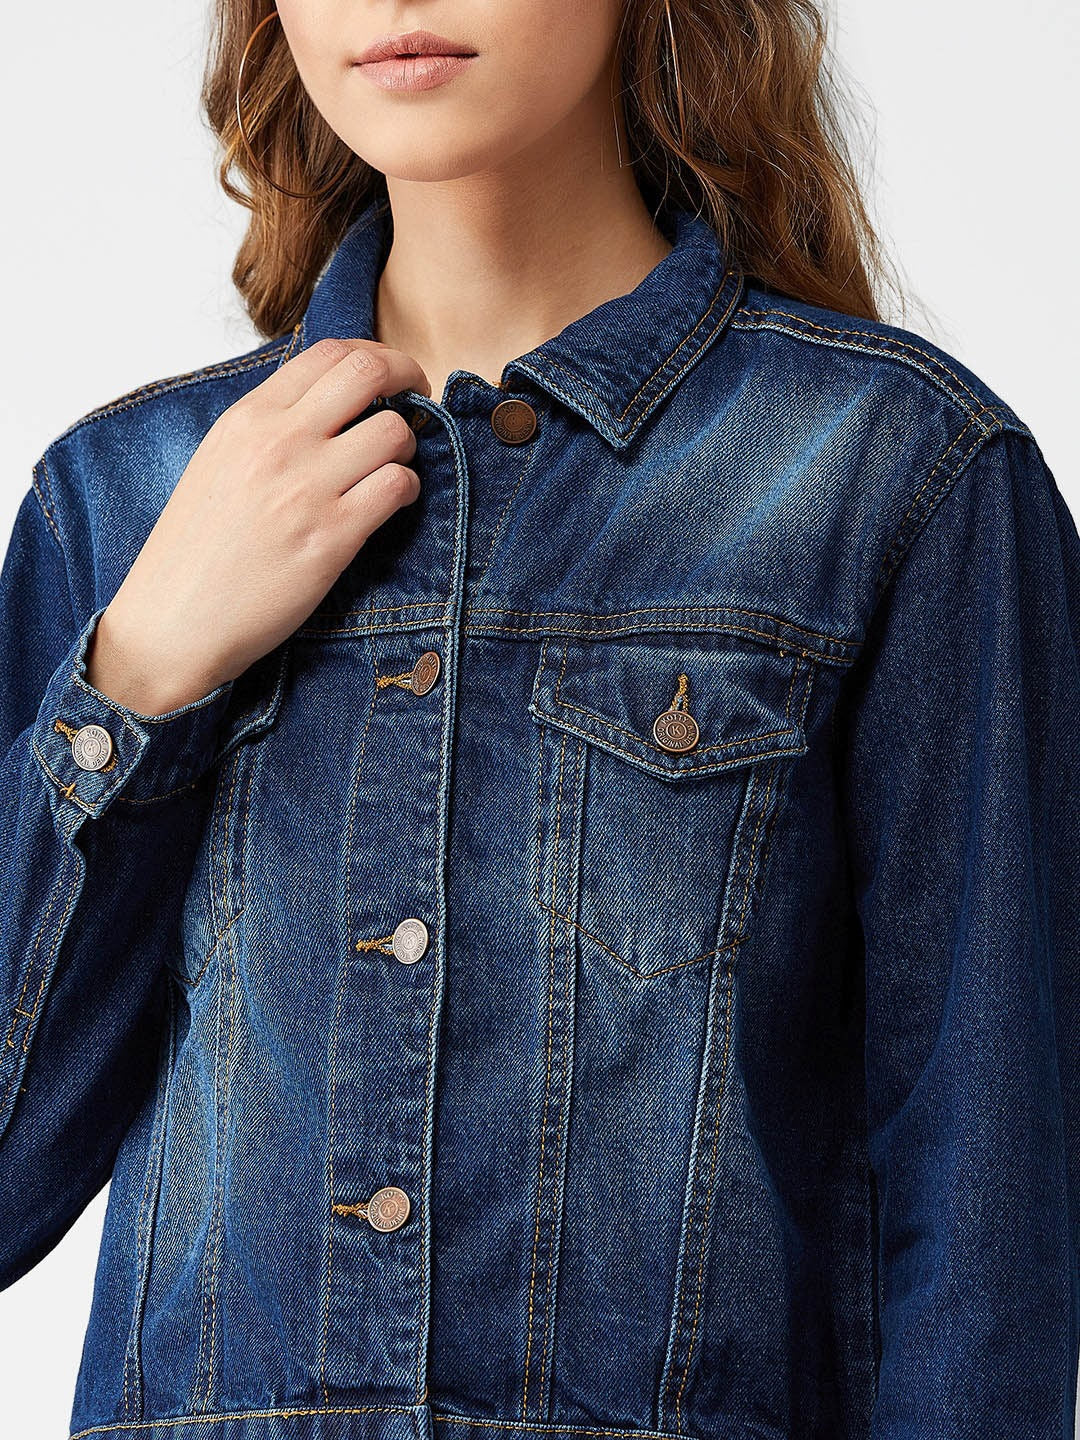 Blue denim jacket with button-up closure, worn by female model in a casual setting.